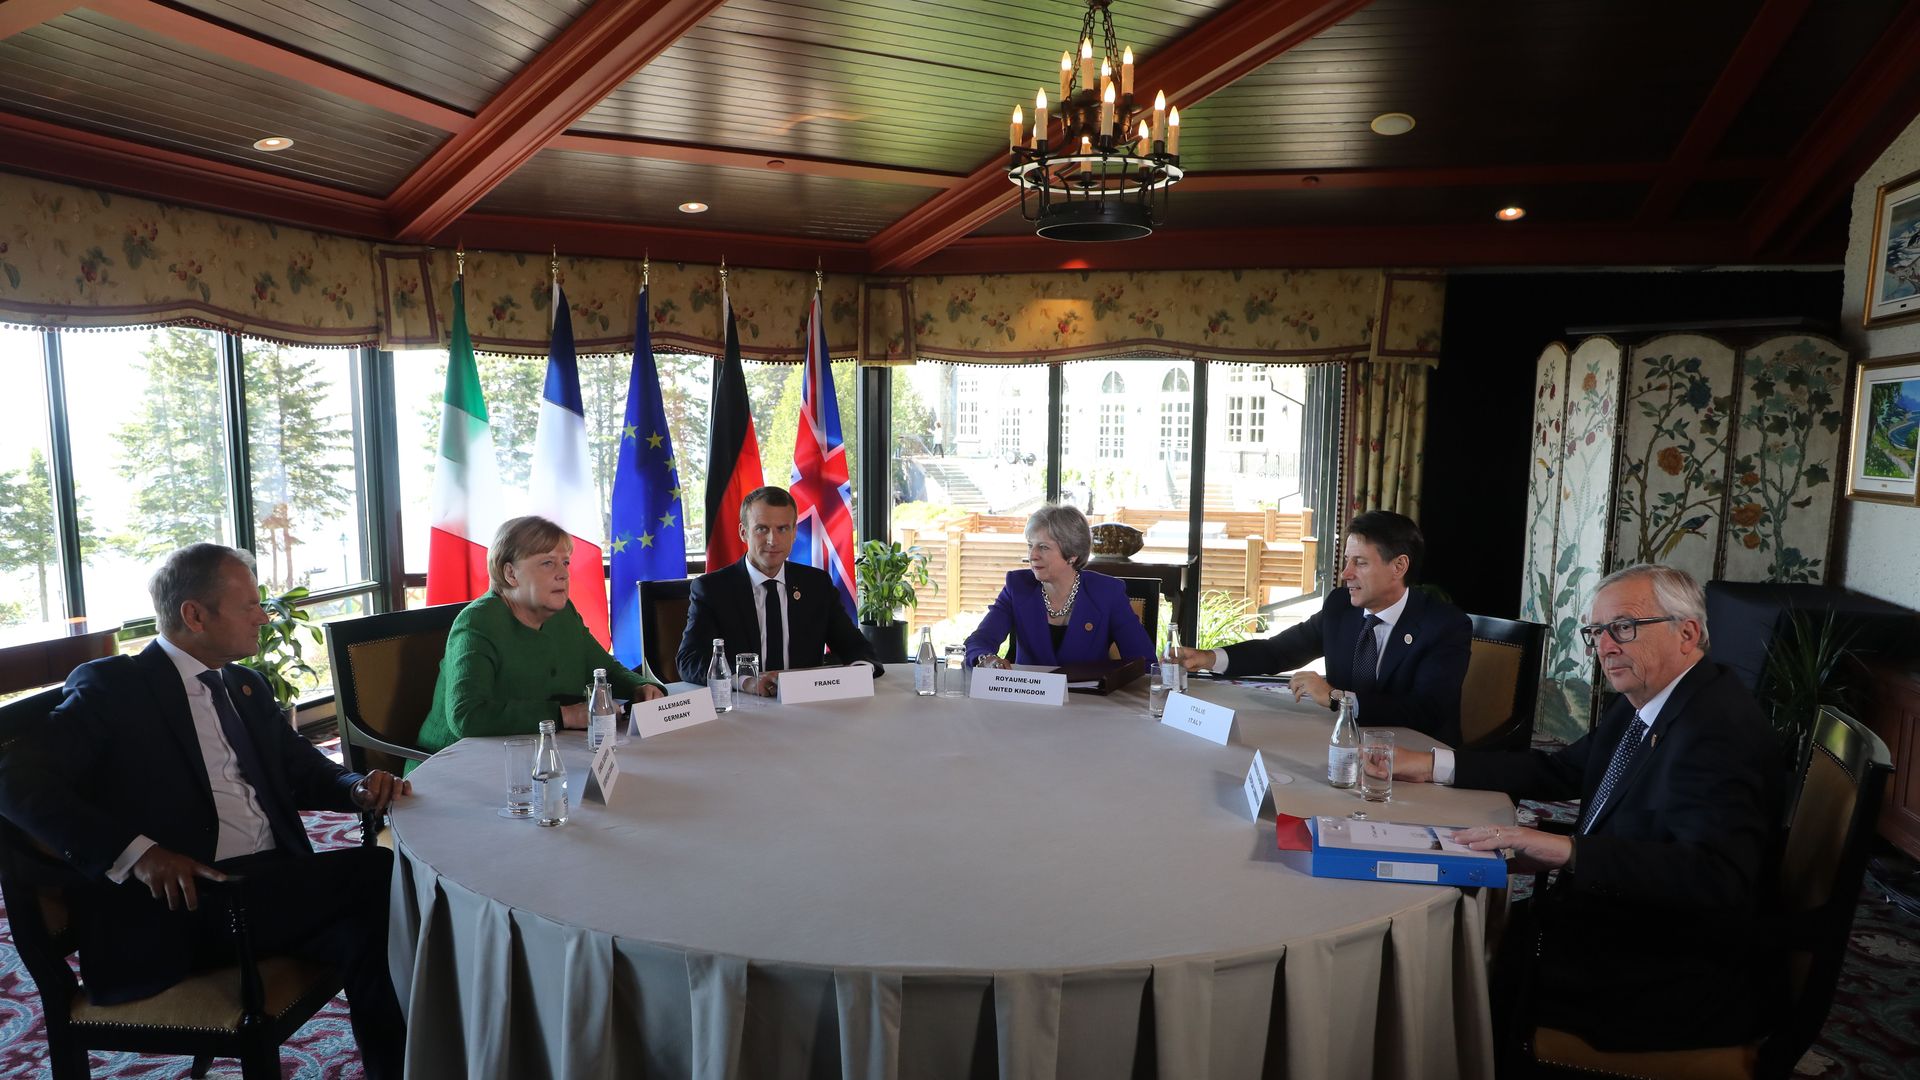 European leaders around a table at the G7 summit